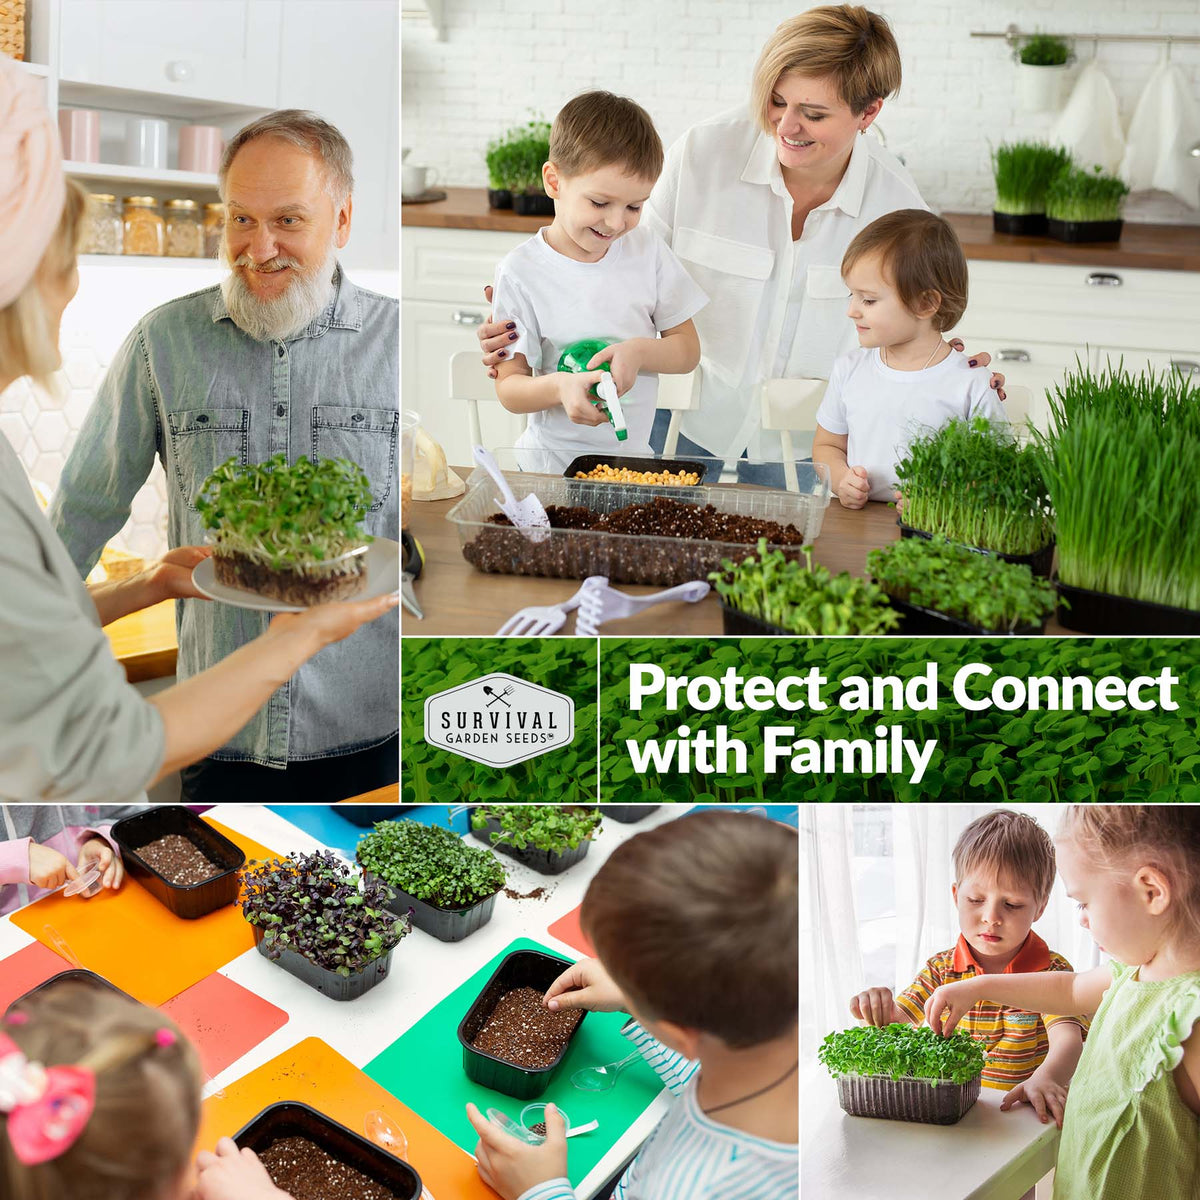 Protect and connect with family